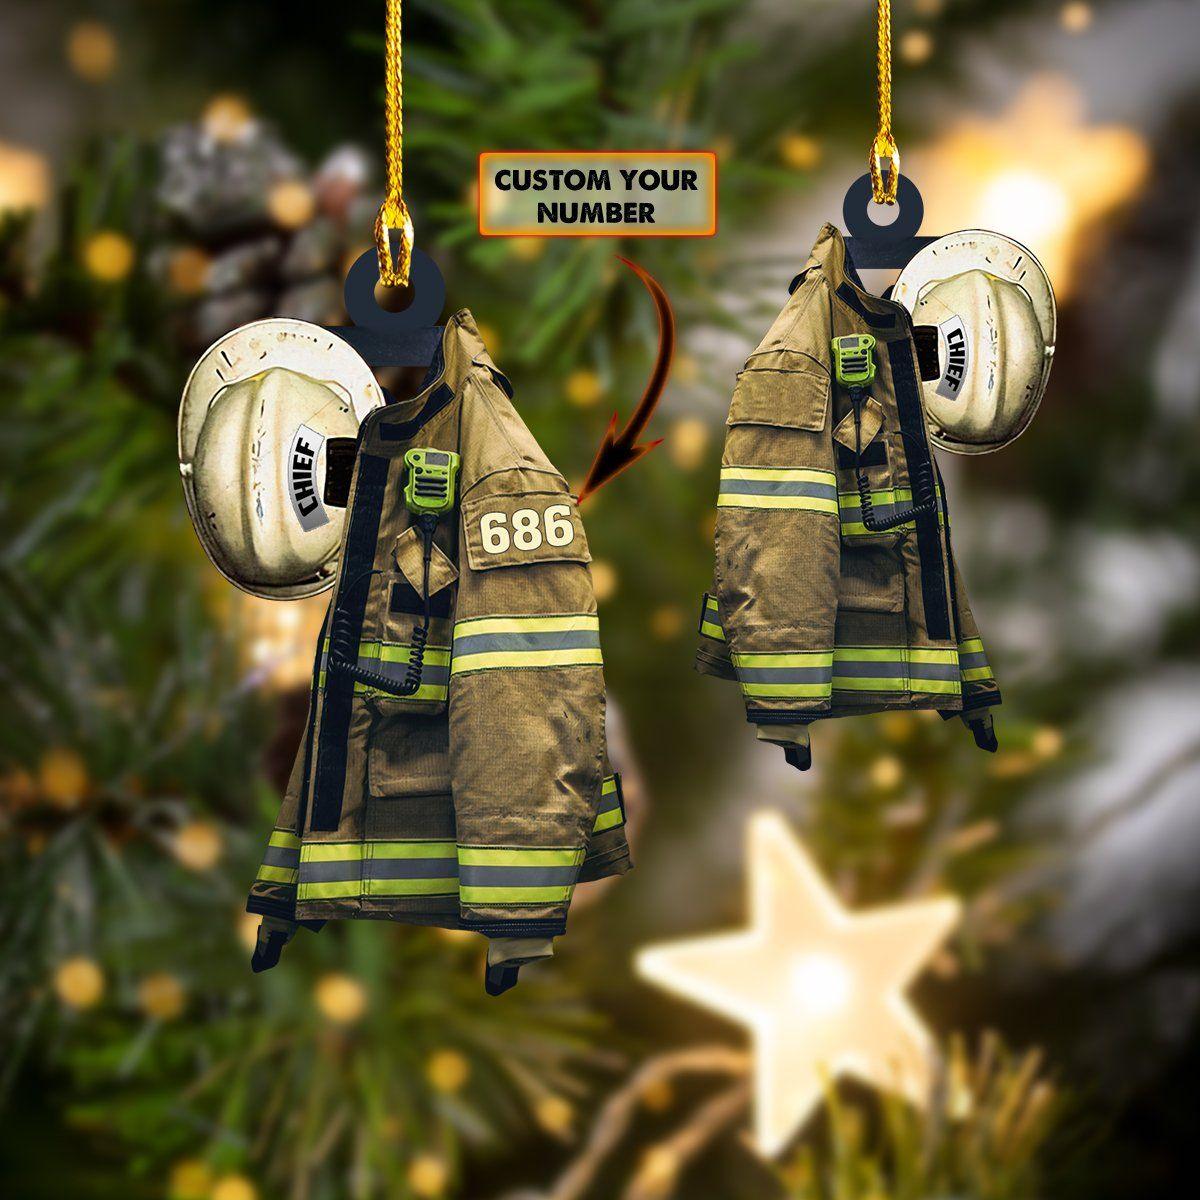 giftngon - Personalized Firefighter Chief WHITE HELMET | Christmas Custom Shaped Ornament | Custom Number